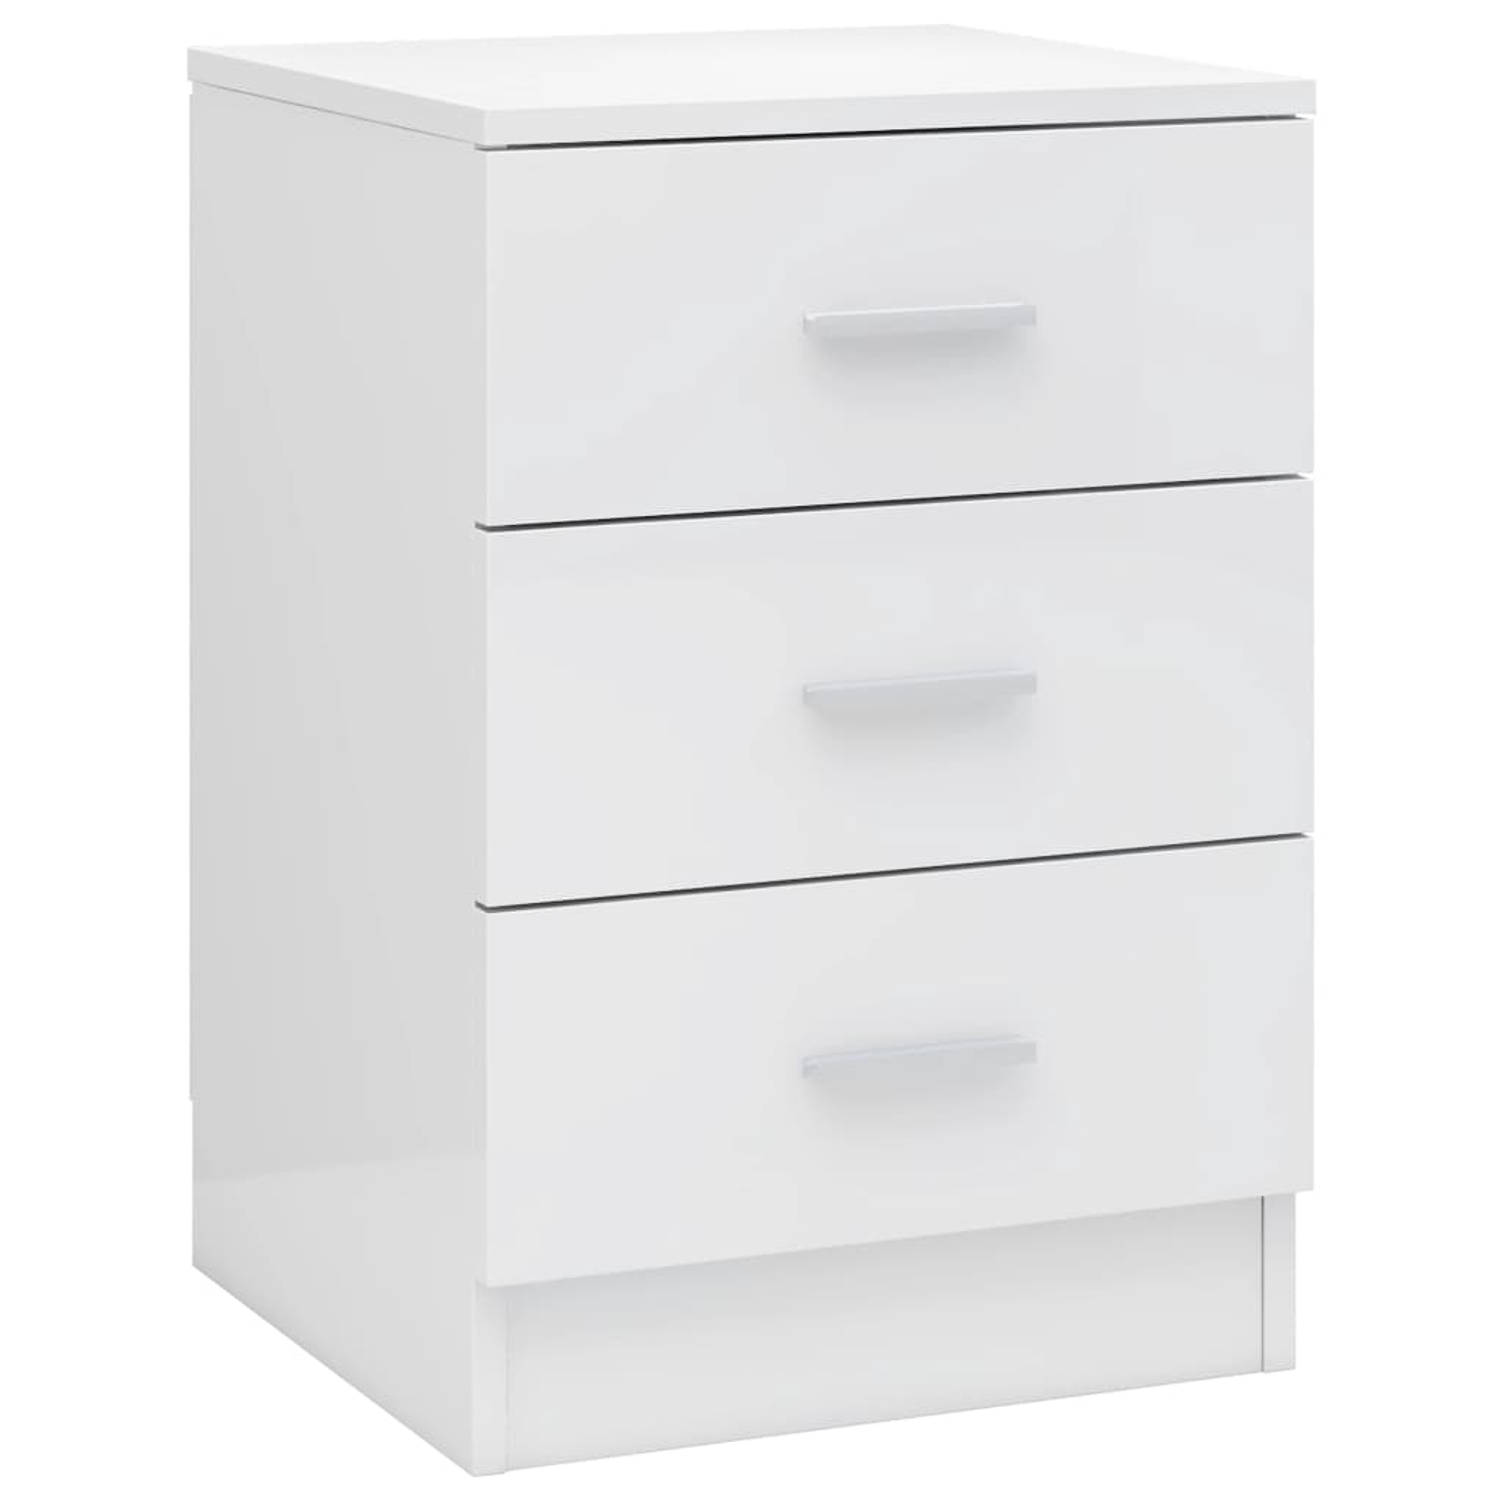 The Living Store nachtkastje Classic - Hout - 38 x 35 x 56 cm - Hoogglans wit